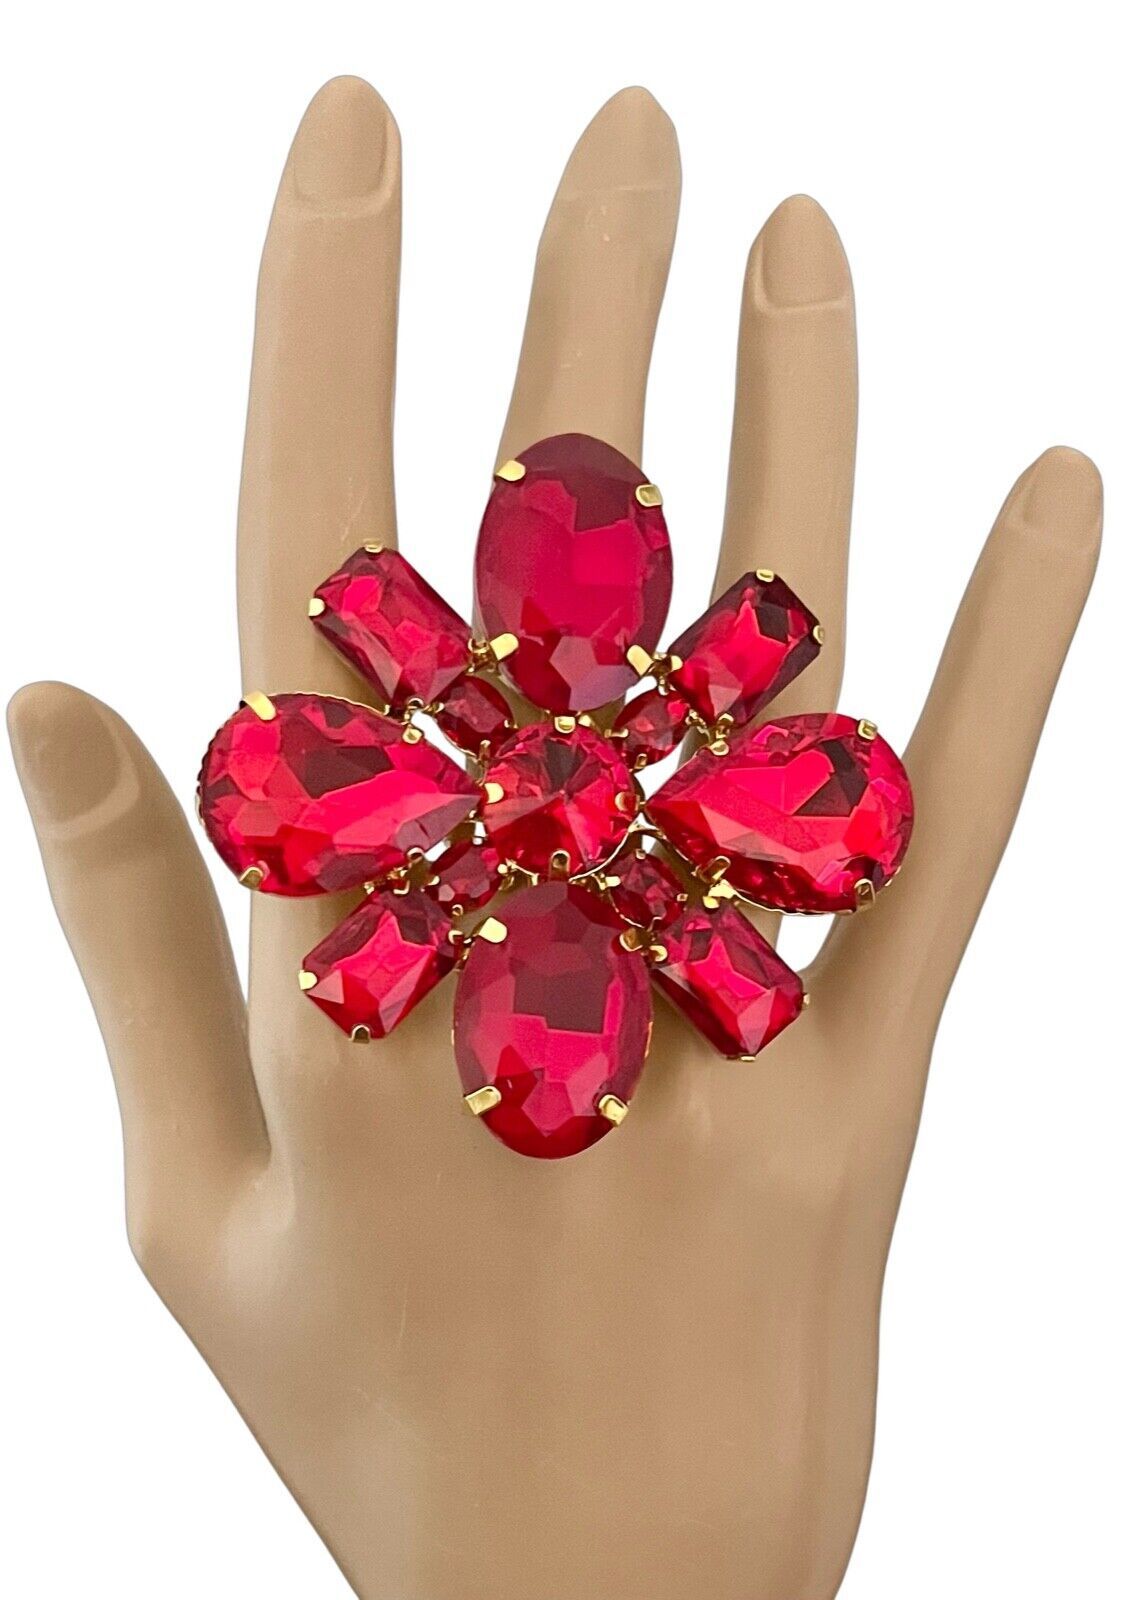 2.25" D Red Cluster Crystal Oversized Statement Party Ring Costume Stage Jewelry - $26.60